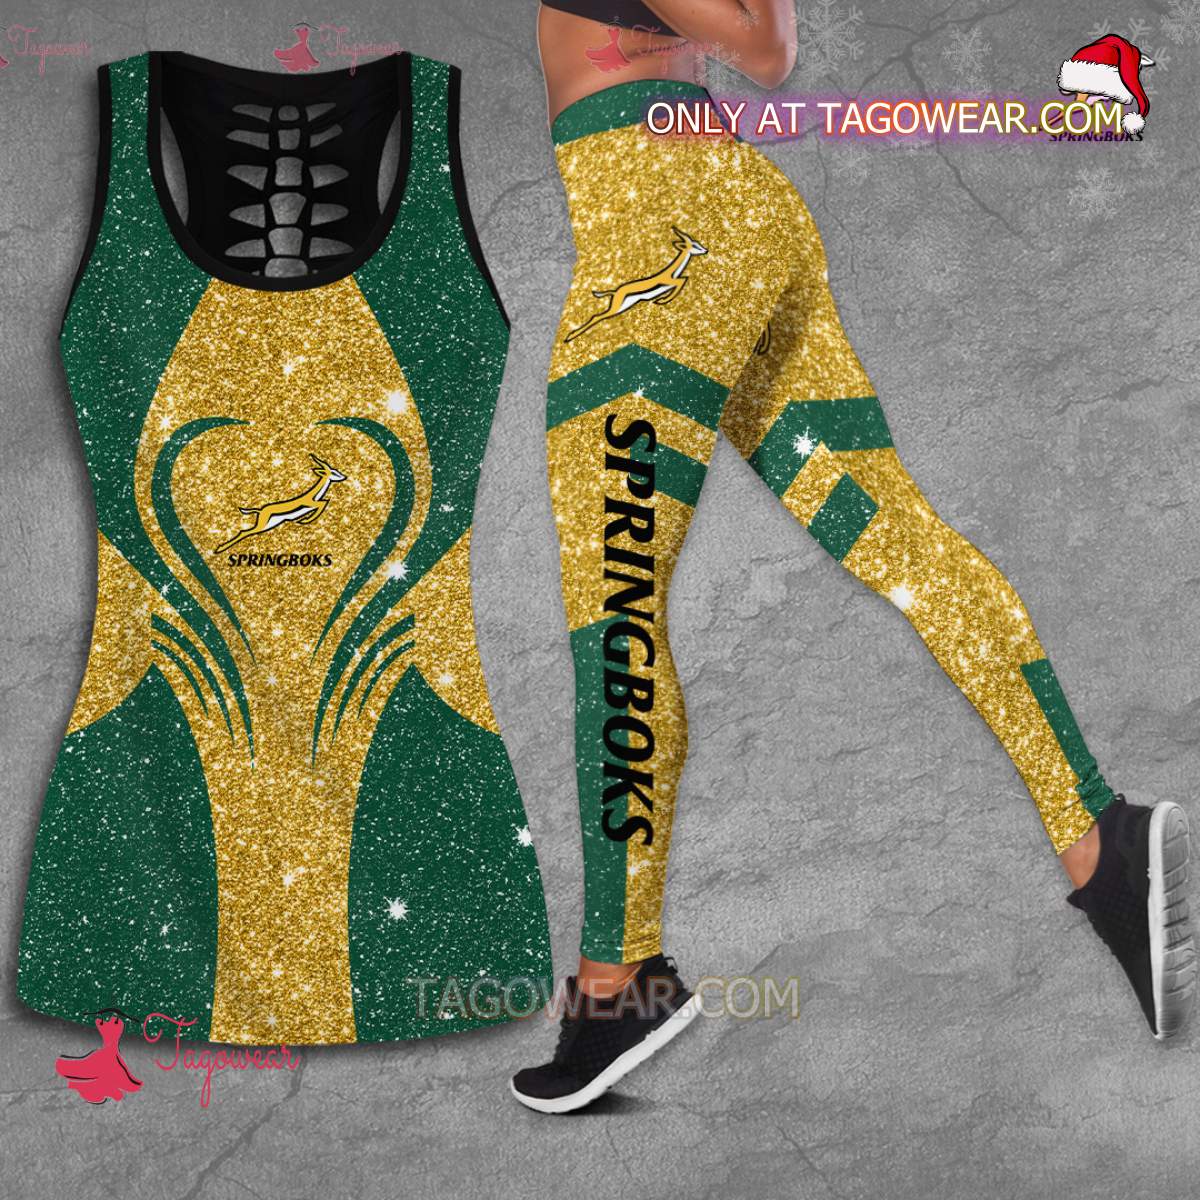 Springboks South Africa Rugby World Cup Glitter Hollow Tank Top And Leggings